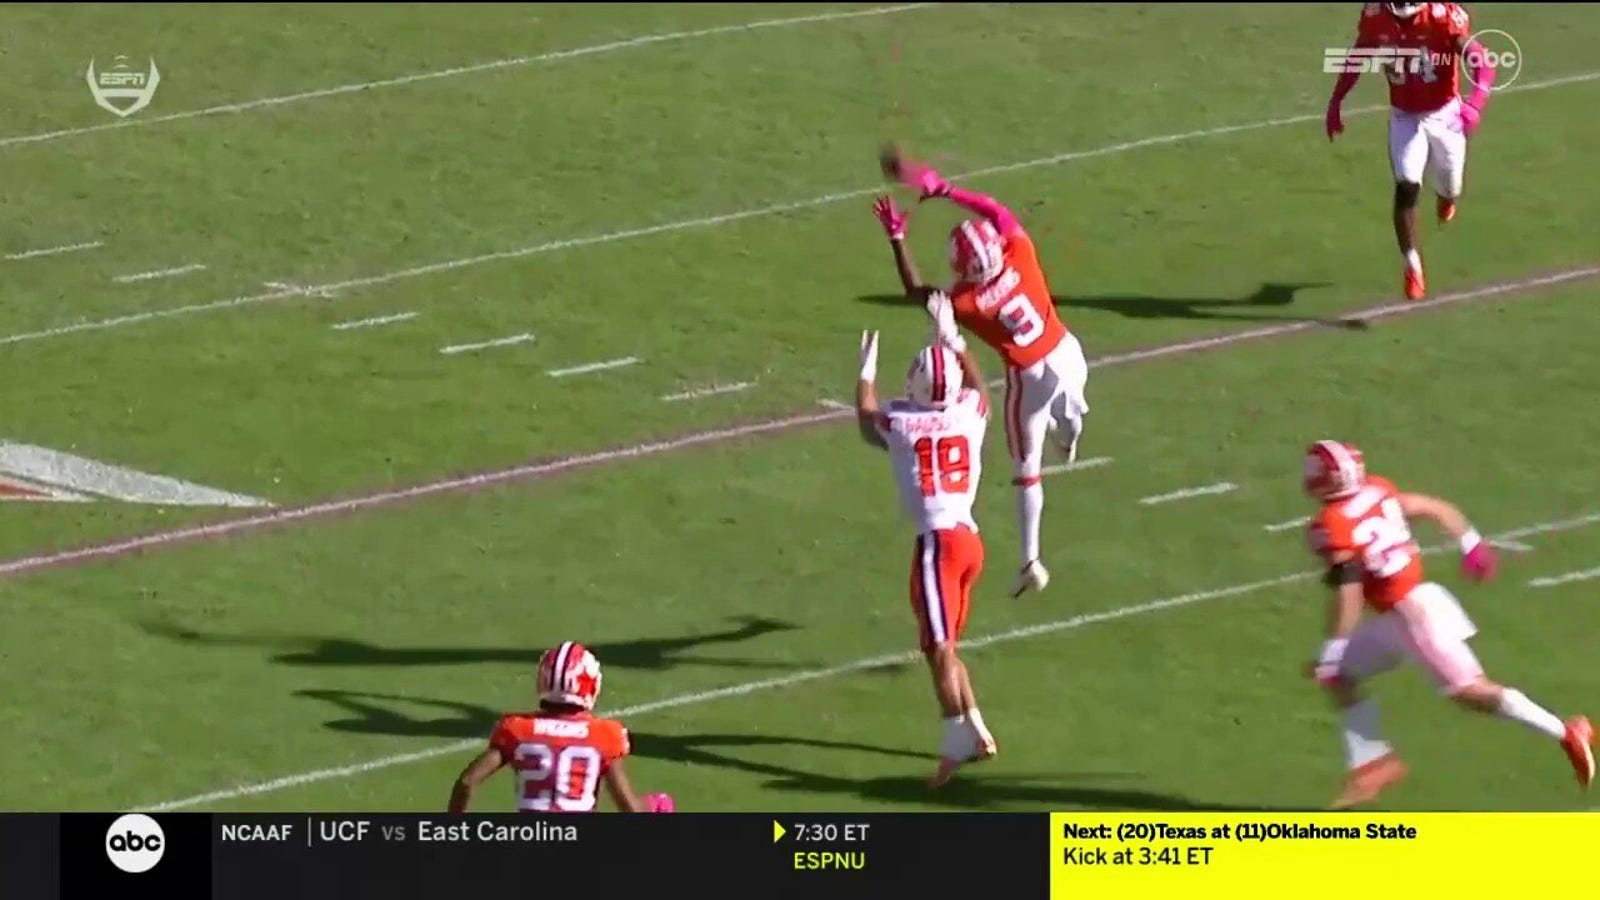 The Clemson Defense comes with a claw with a leak-proof interceptor